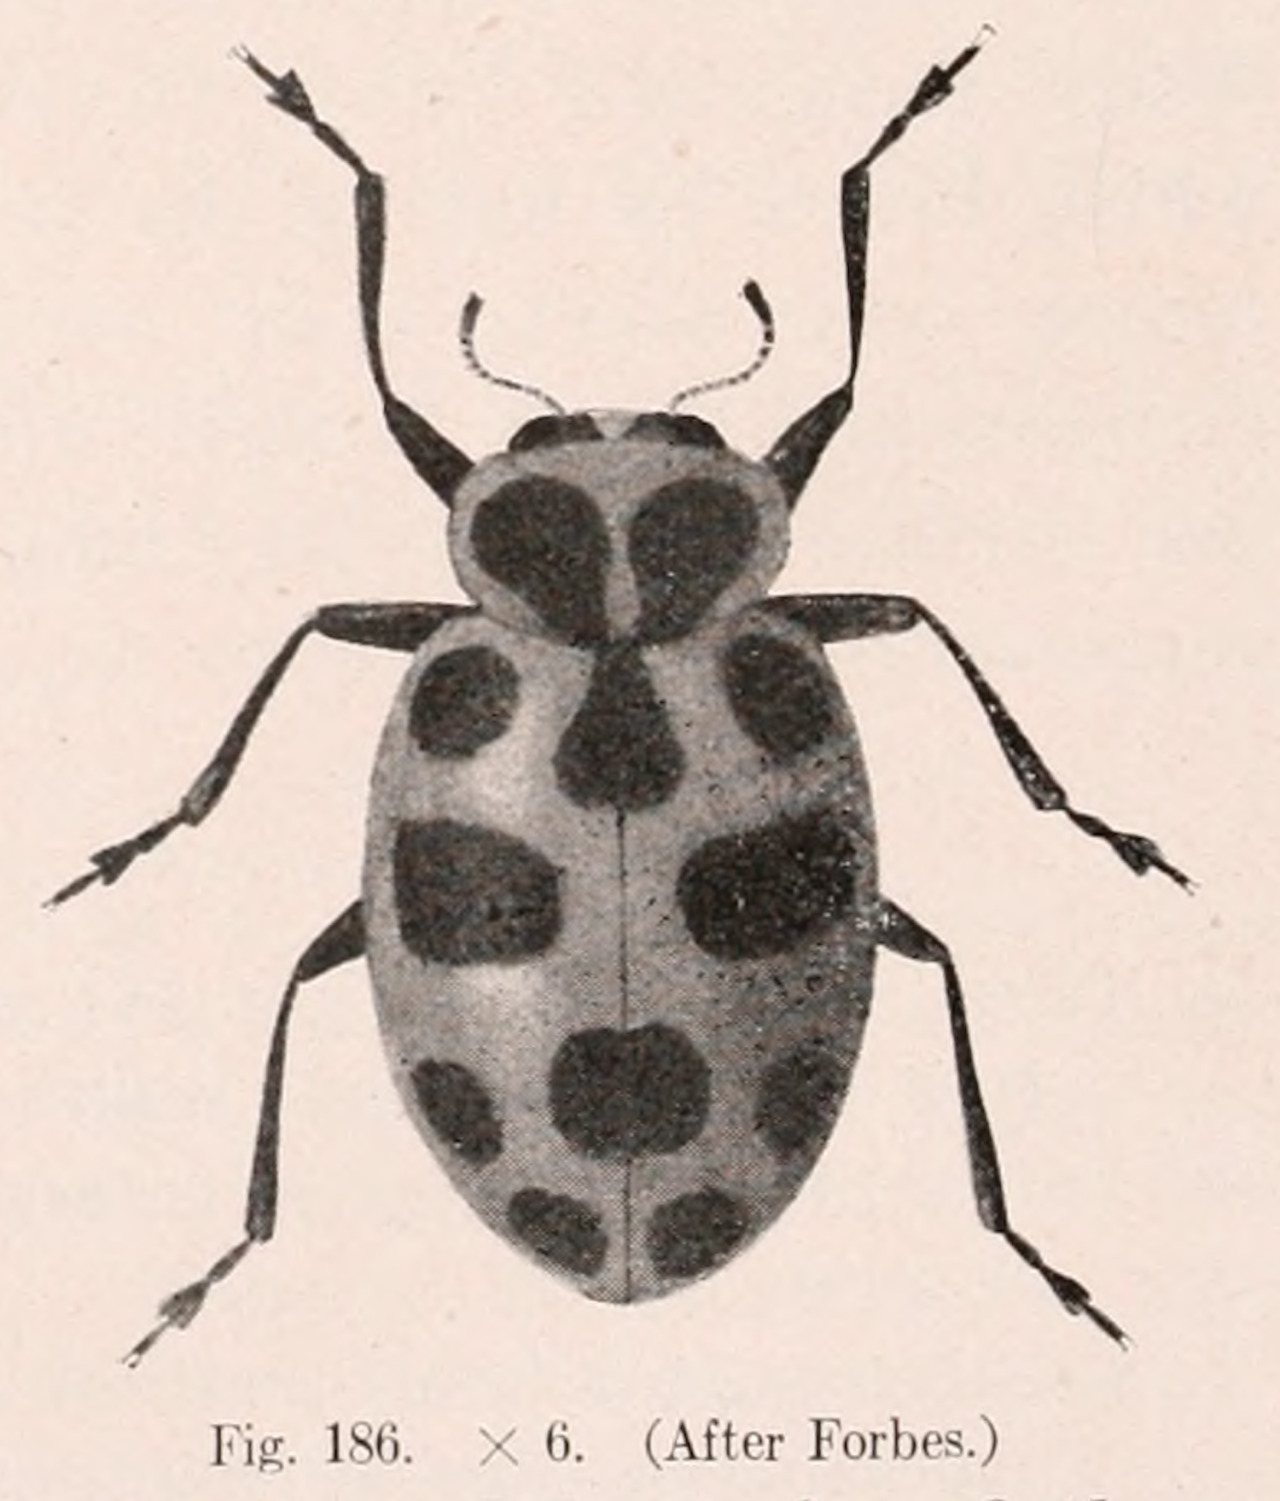 Fig. 186.  Megilla Maculata, Spotted Lady Beetle. An illustrated descriptive catalogue of the Coleoptera or beetles (exclusive of the Rhynchophora) known to occur in Indiana. 1910.Internet Archive #ladybug#spotted#zoology#insects#nemfrog#1910#1910s